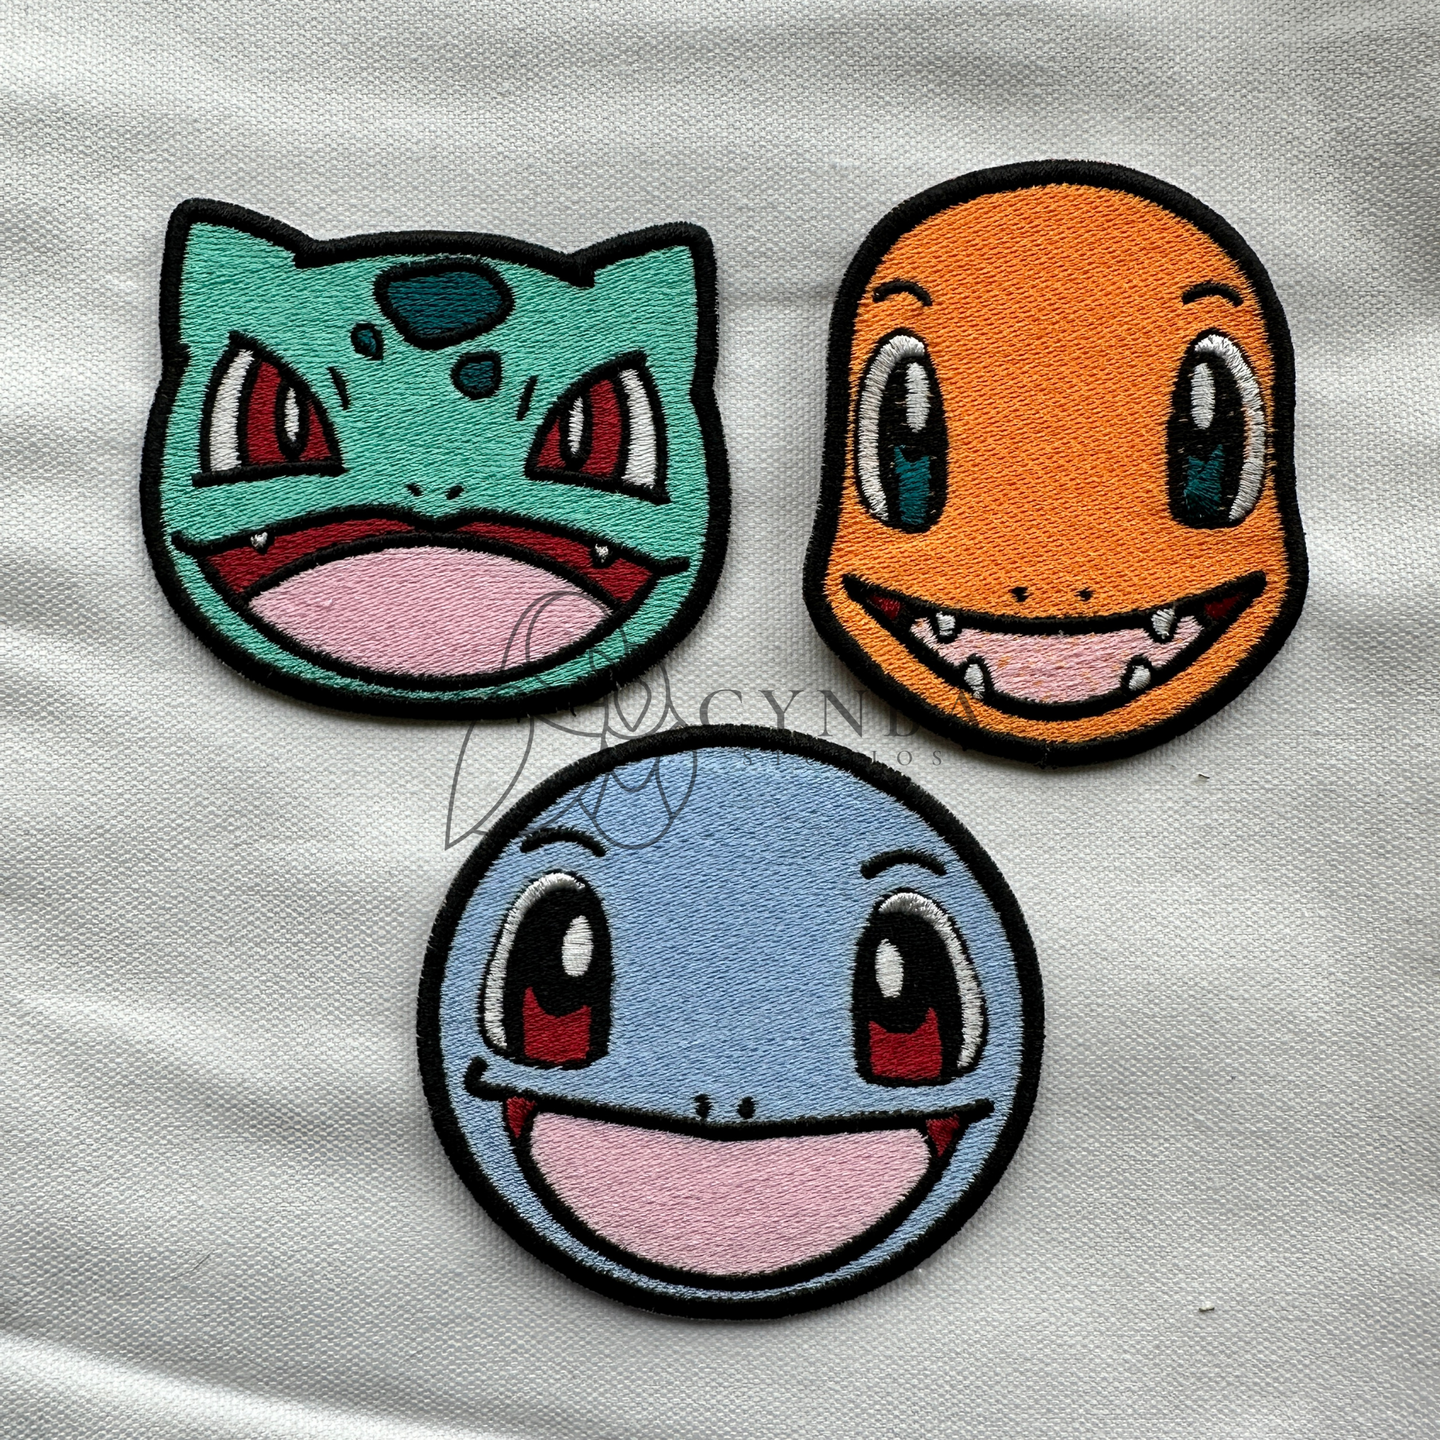 All Element Cuties Embroidered Patch